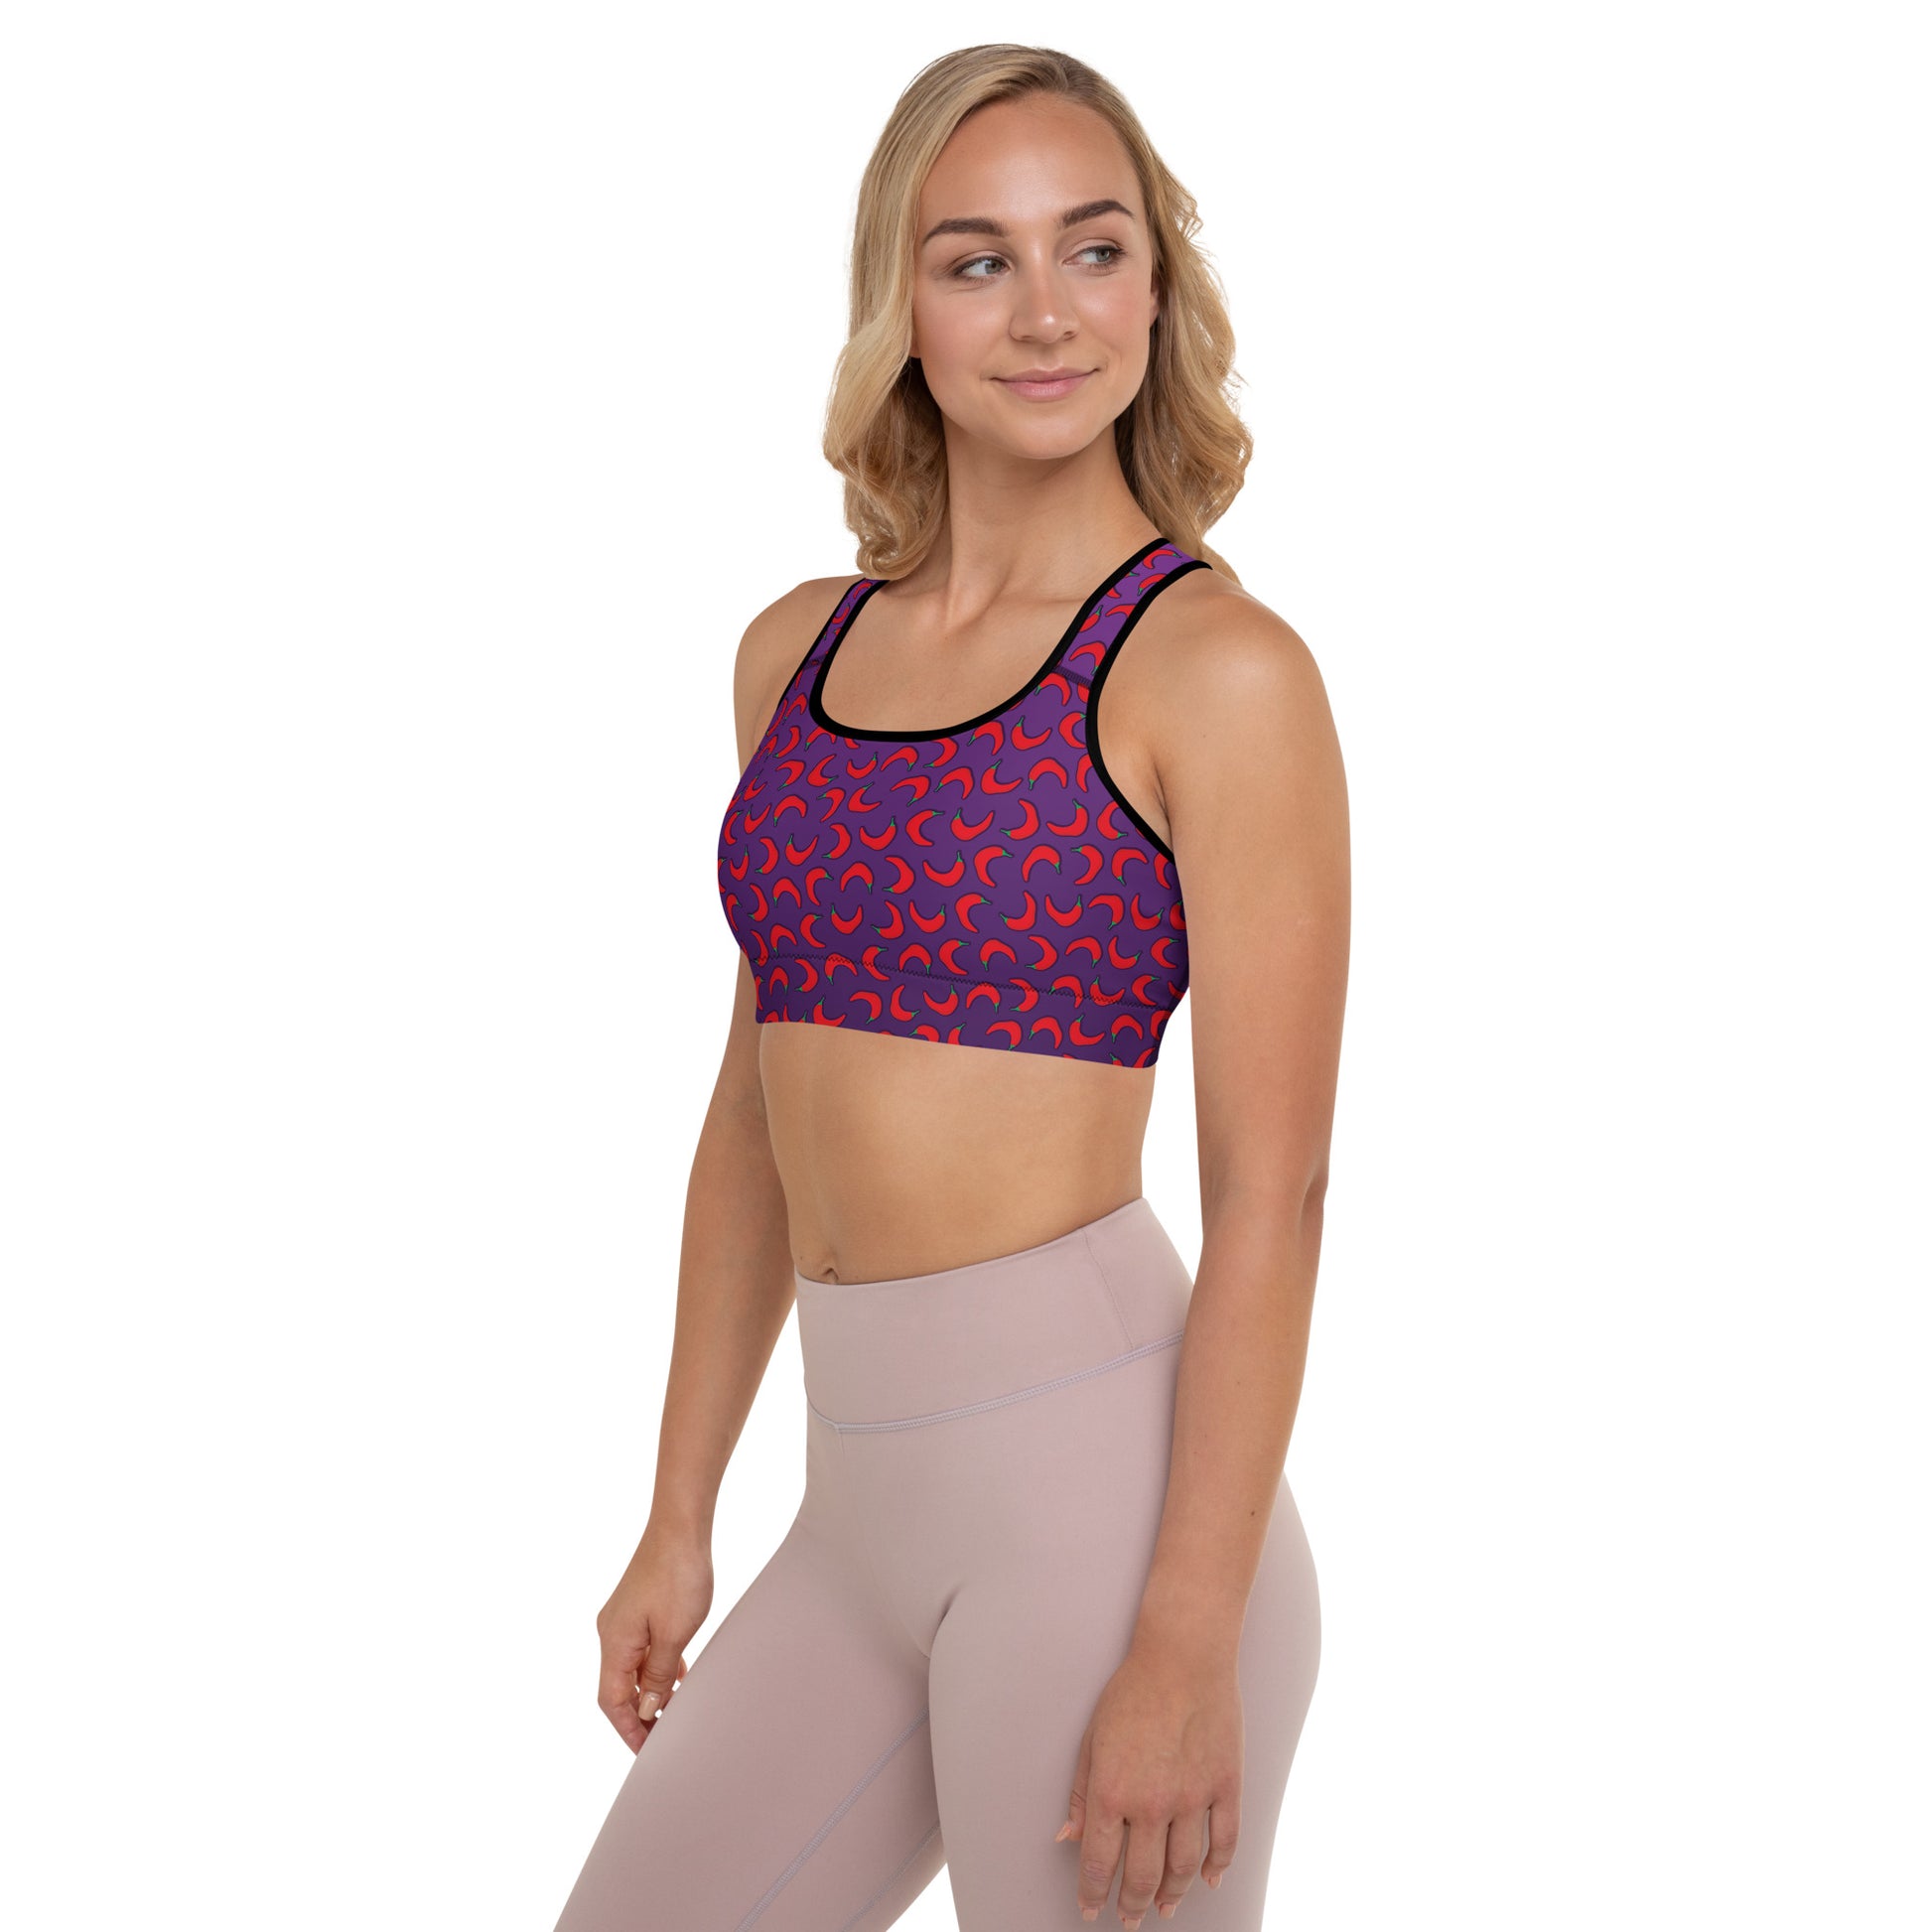 Weirdo | An extremely hot sports bra, for extremely hot weirdos! This padded sports bra in the color purple with red peppers, is for female weirdos who like sports, yoga or just a sports bra in general.